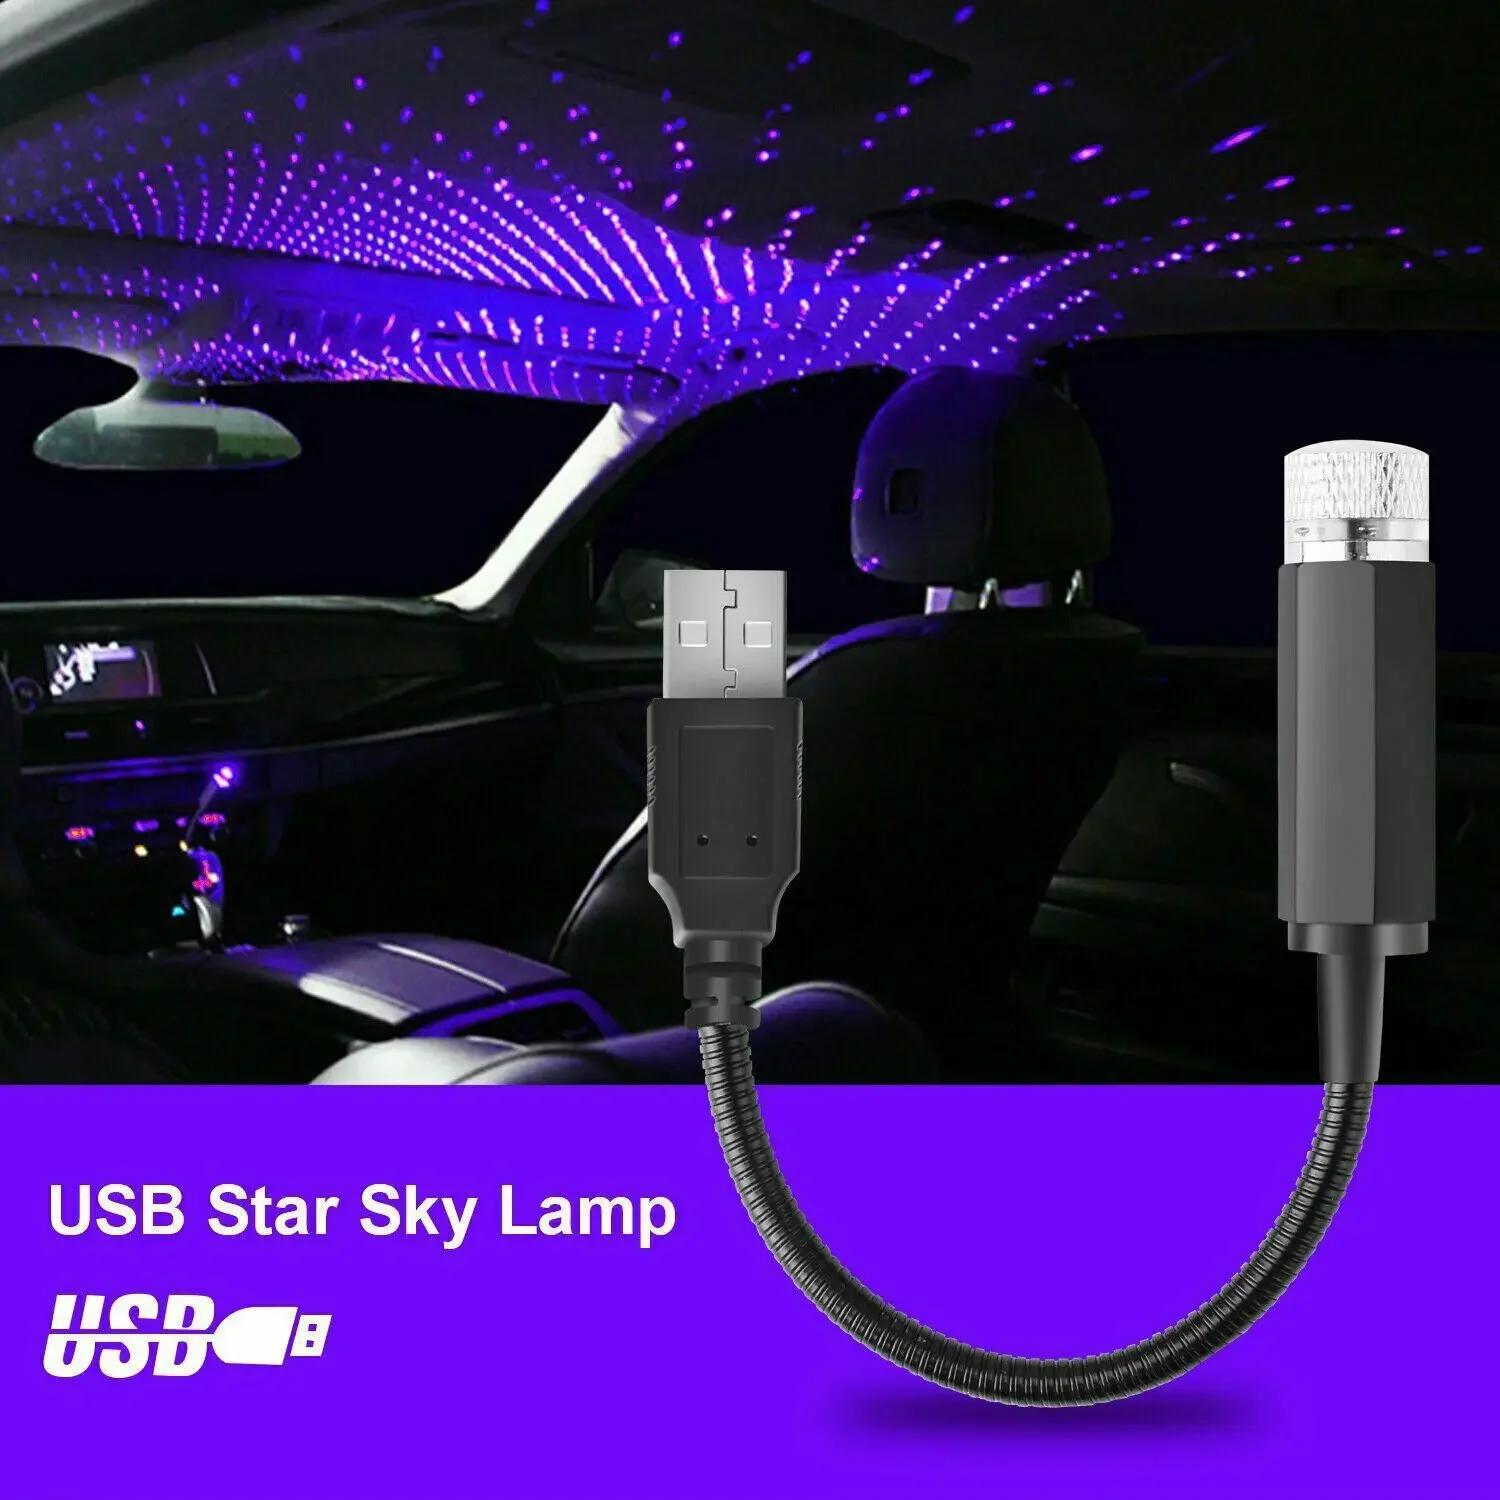 

Car Romantic LED Starry Sky Night Light 5V USB Powered Galaxy Star Projector Lamp For Car Roof Room Ceiling Decor Plug and Play